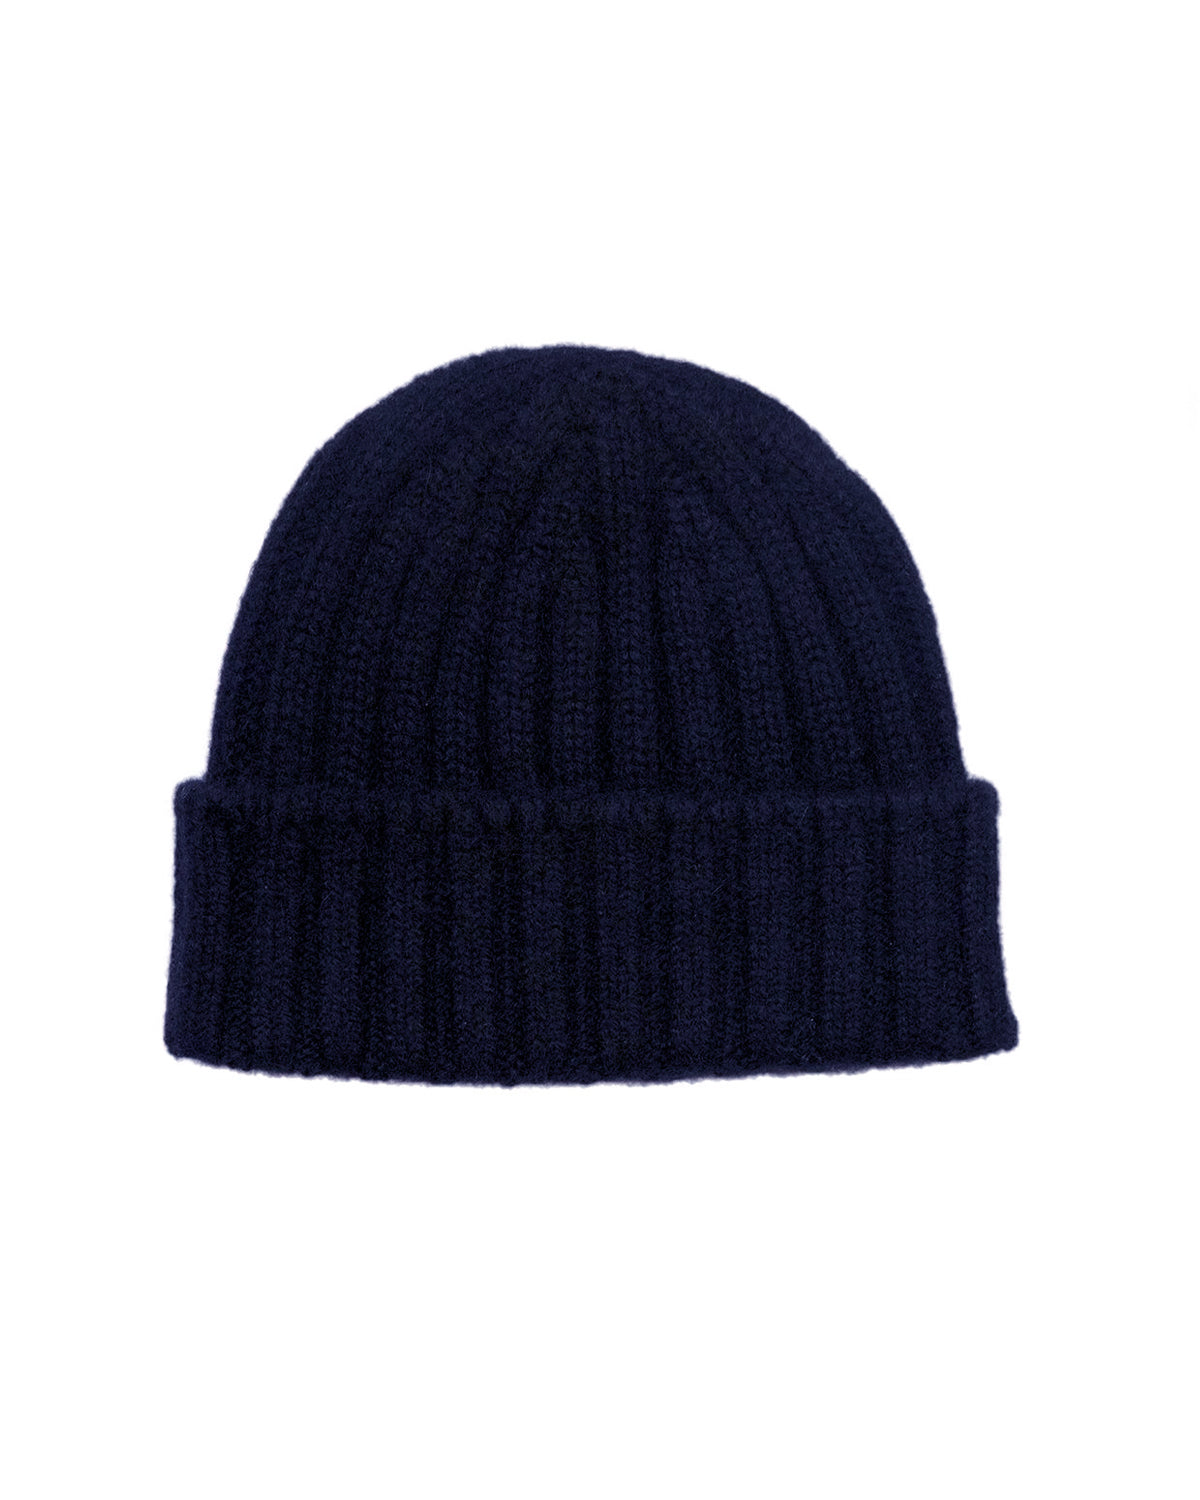 Knit Cap in Cashmere 2x2 Rib - Navy